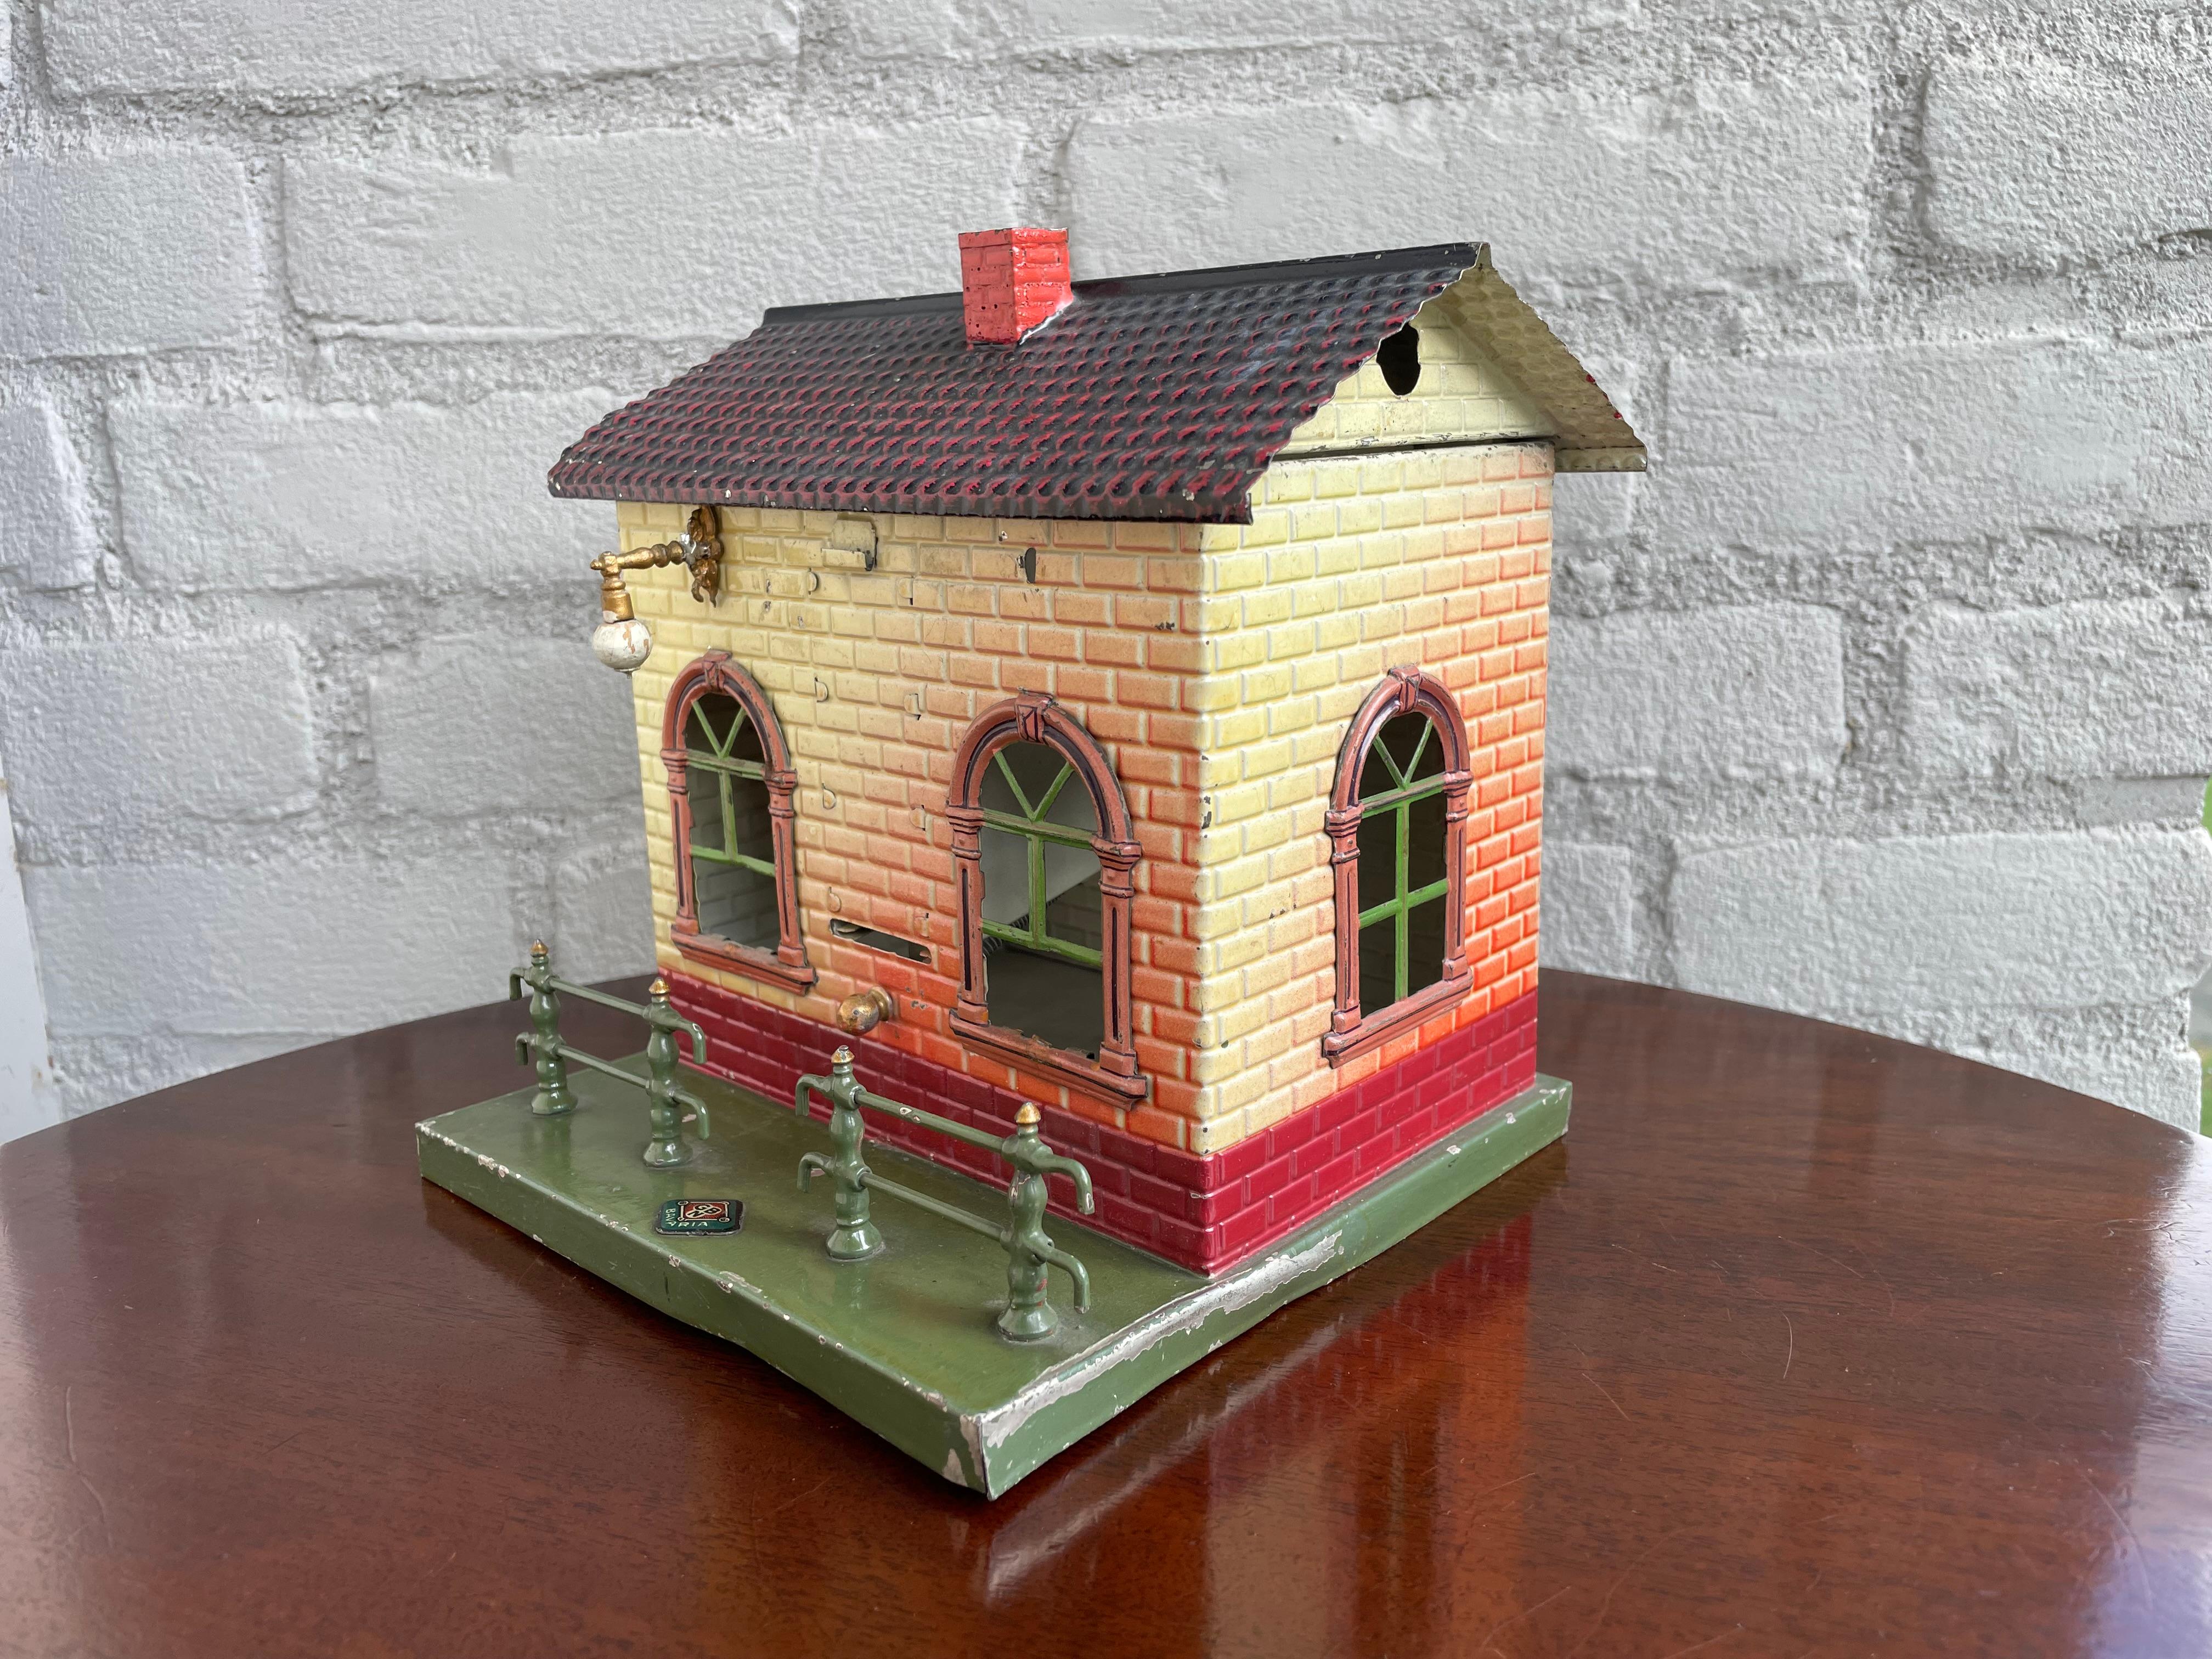 Very rare and great looking antique toy train ticket dispenser by Gebruder Bing, Nurnberg (GBN).

Since buying and selling only the rarest antiques has become part of our goal(s) in life, we did not hesitate one second when we were given the